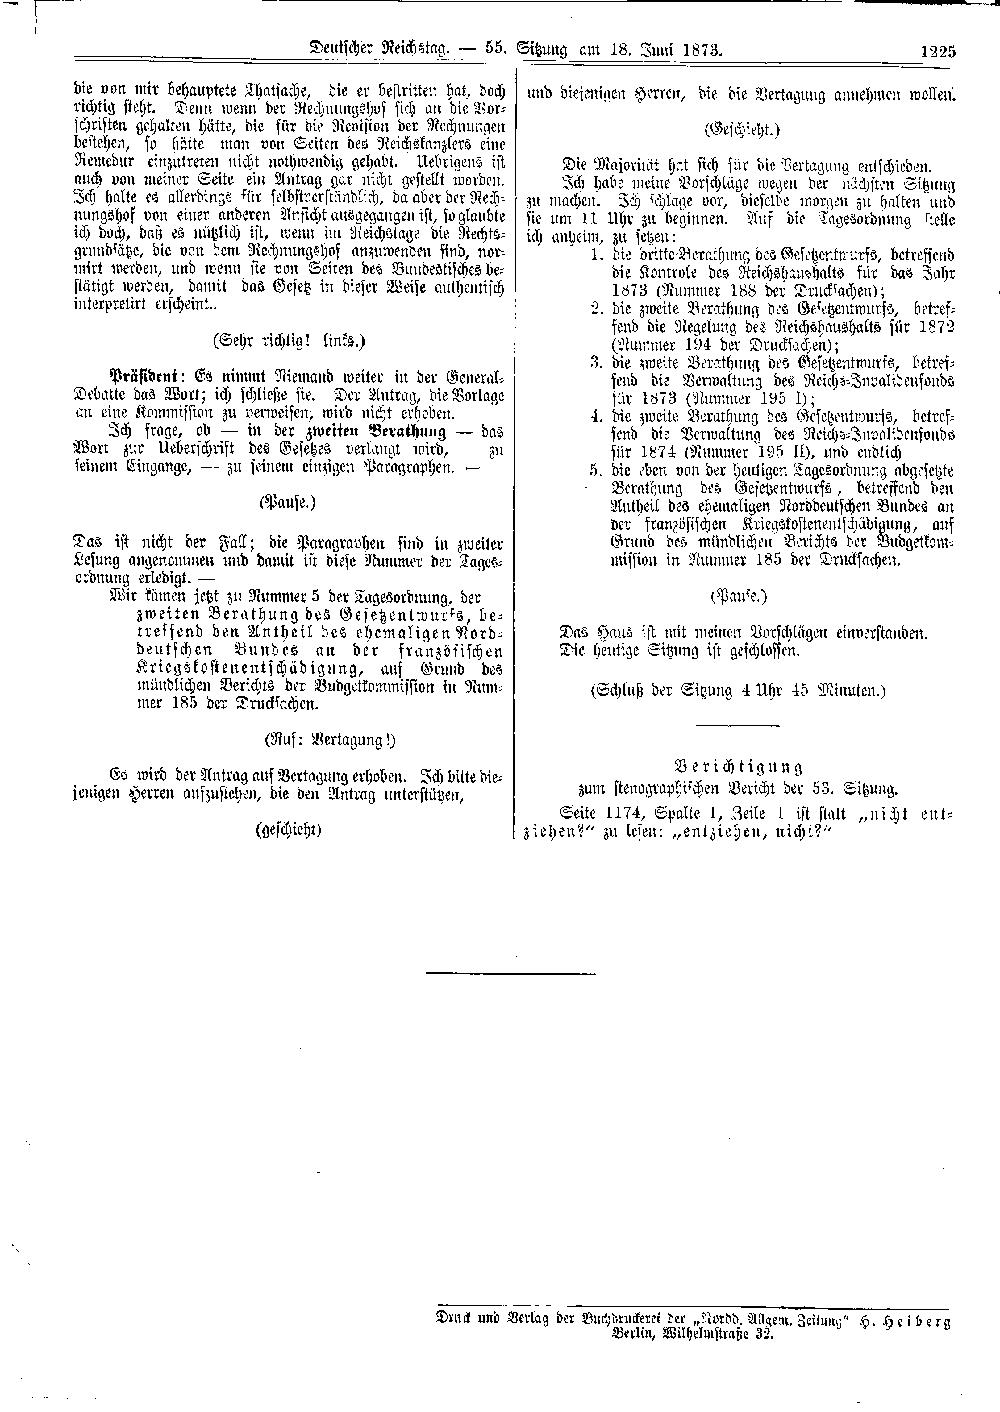 Scan of page 1225